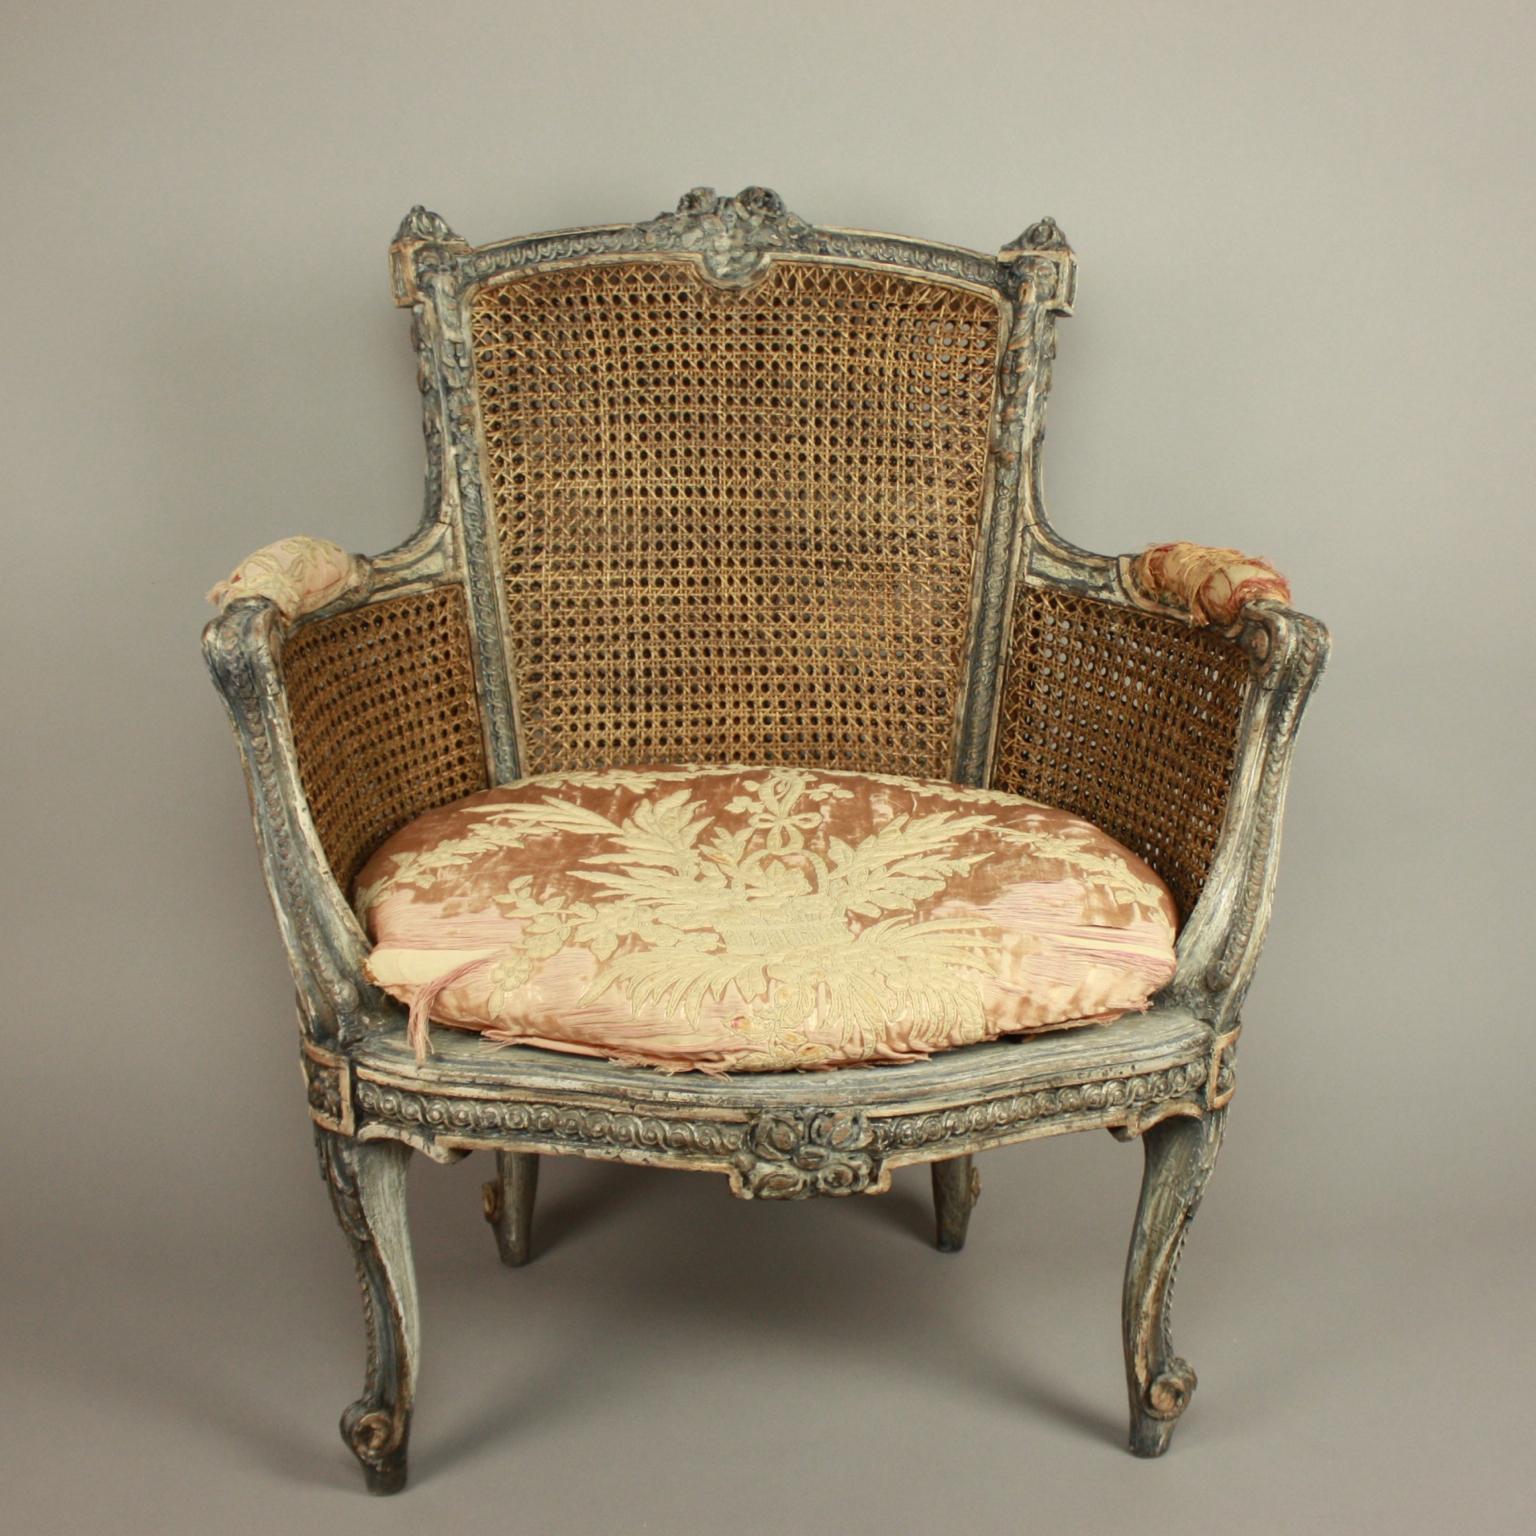 Napoleon III 19th Century Louis XVI Style Caned and Painted Bergere or Armchair